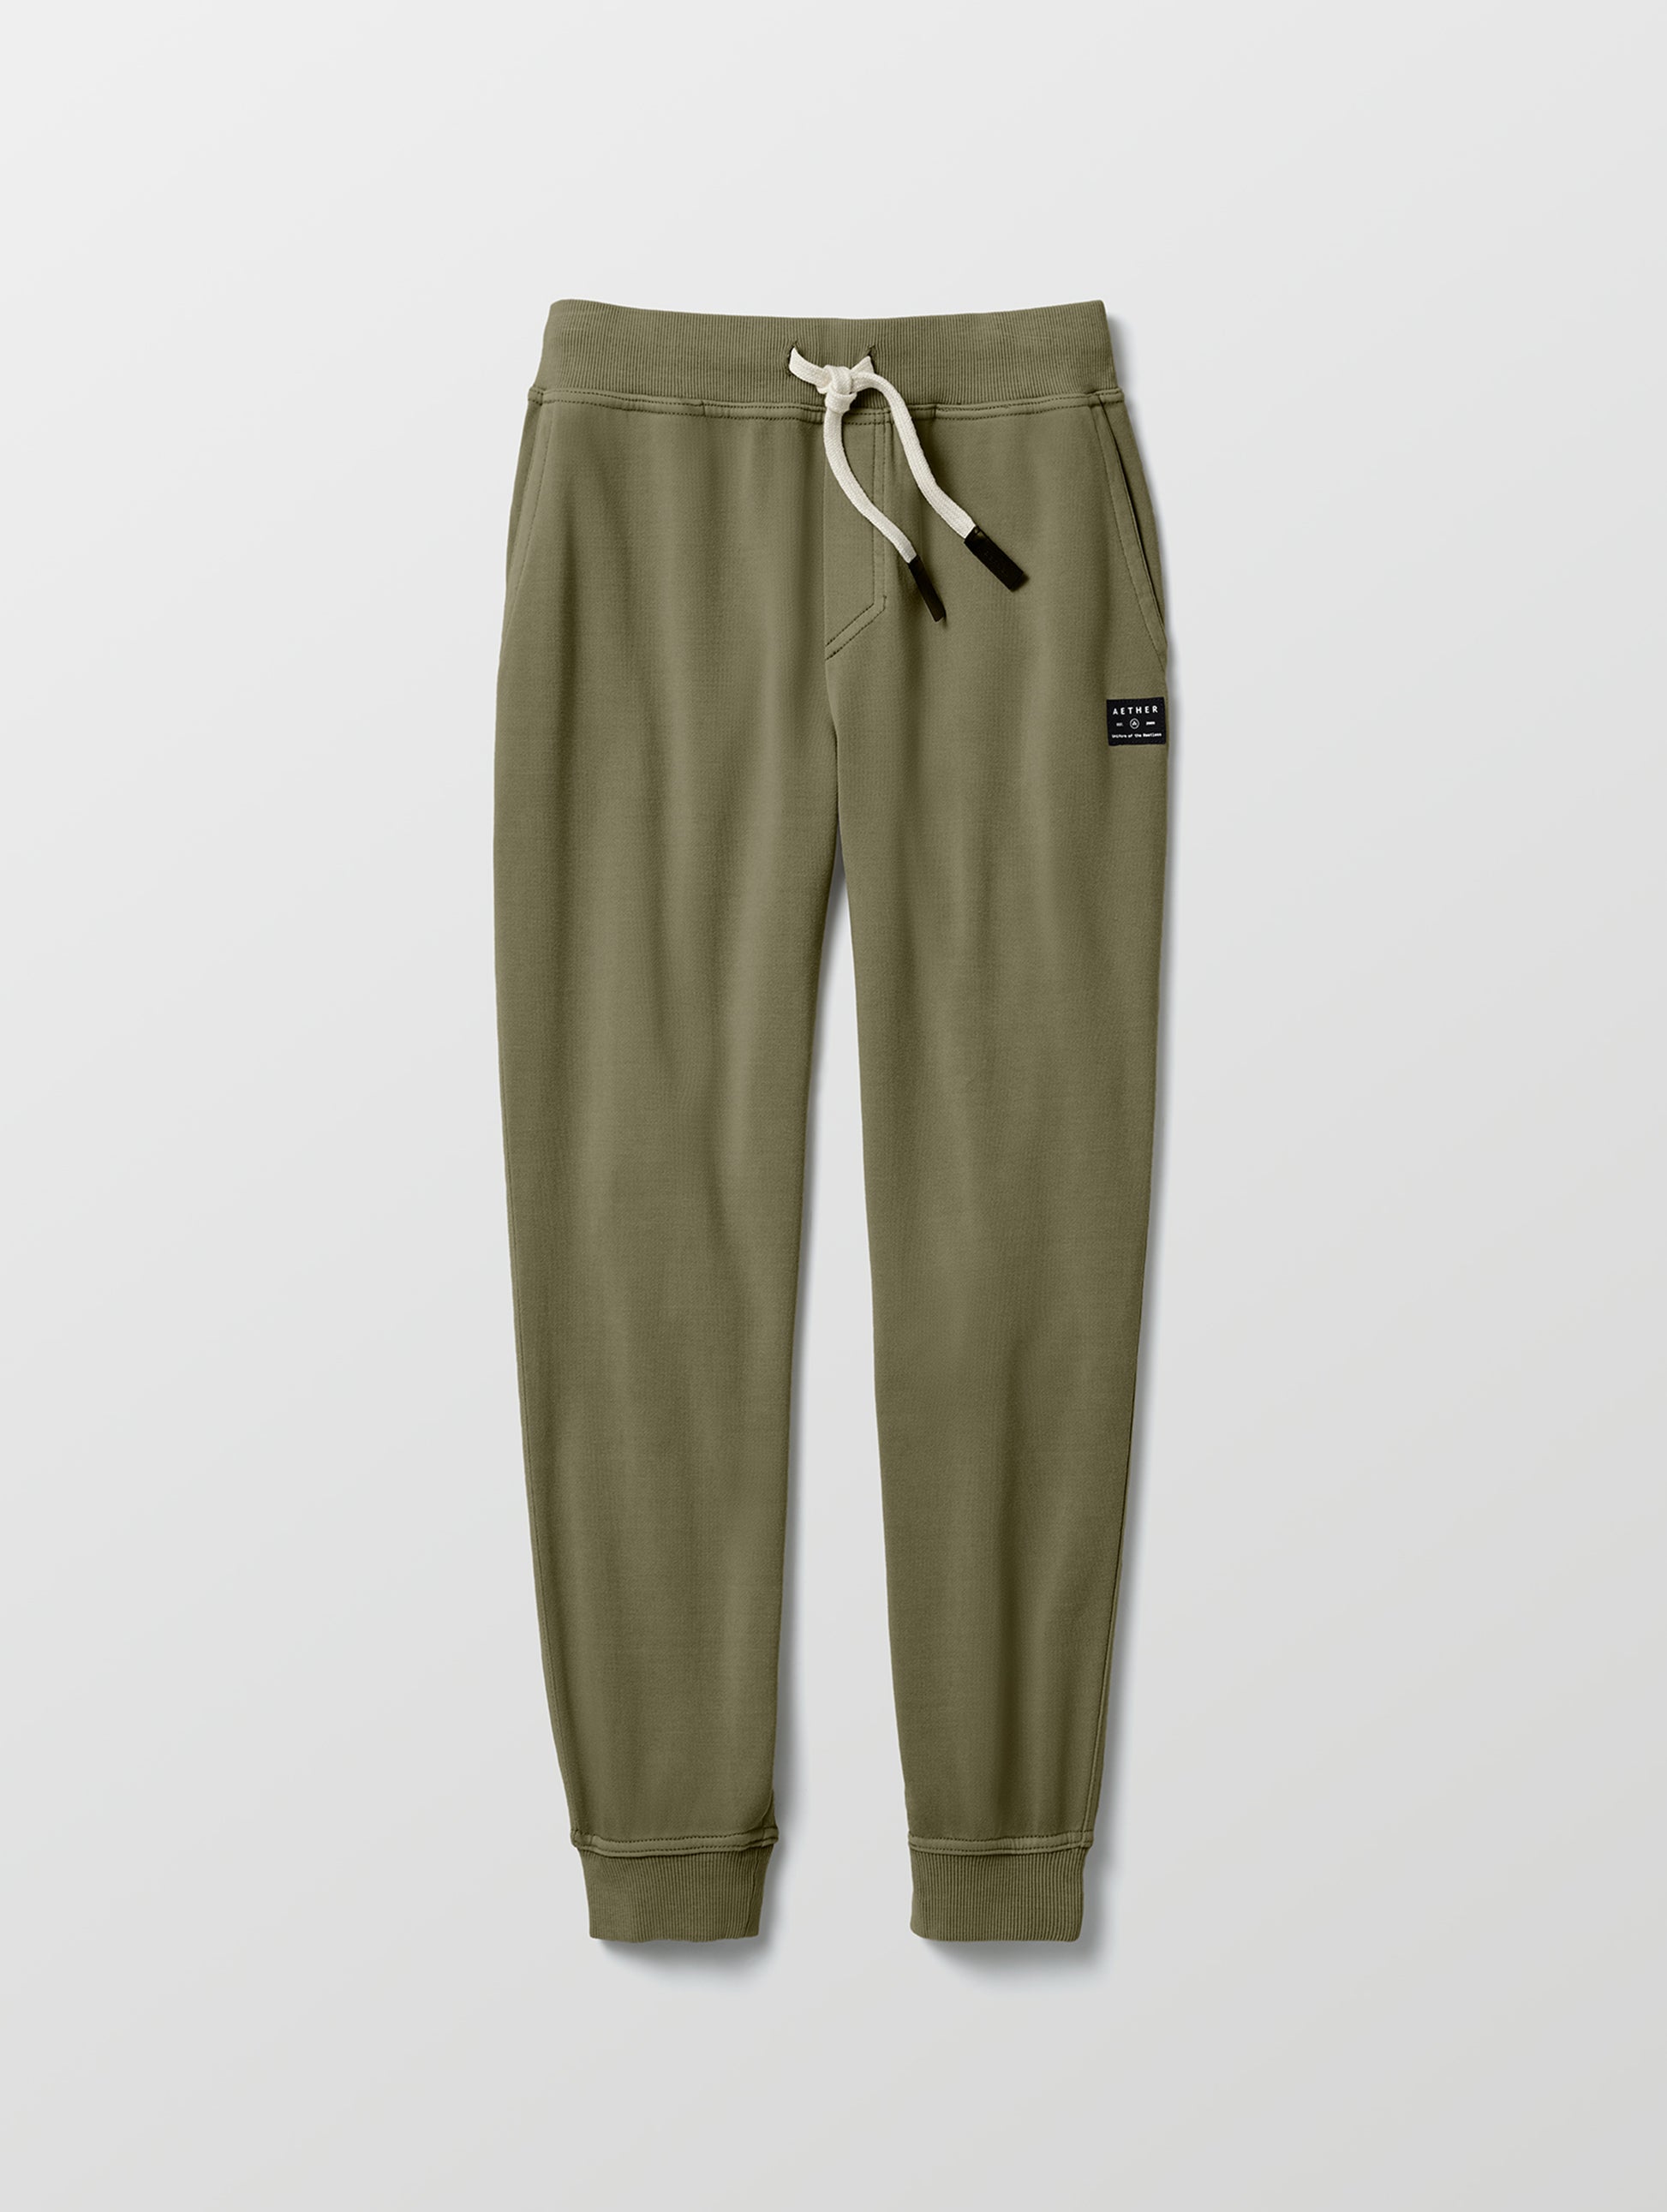 green jogger for women from AETHER Apparel